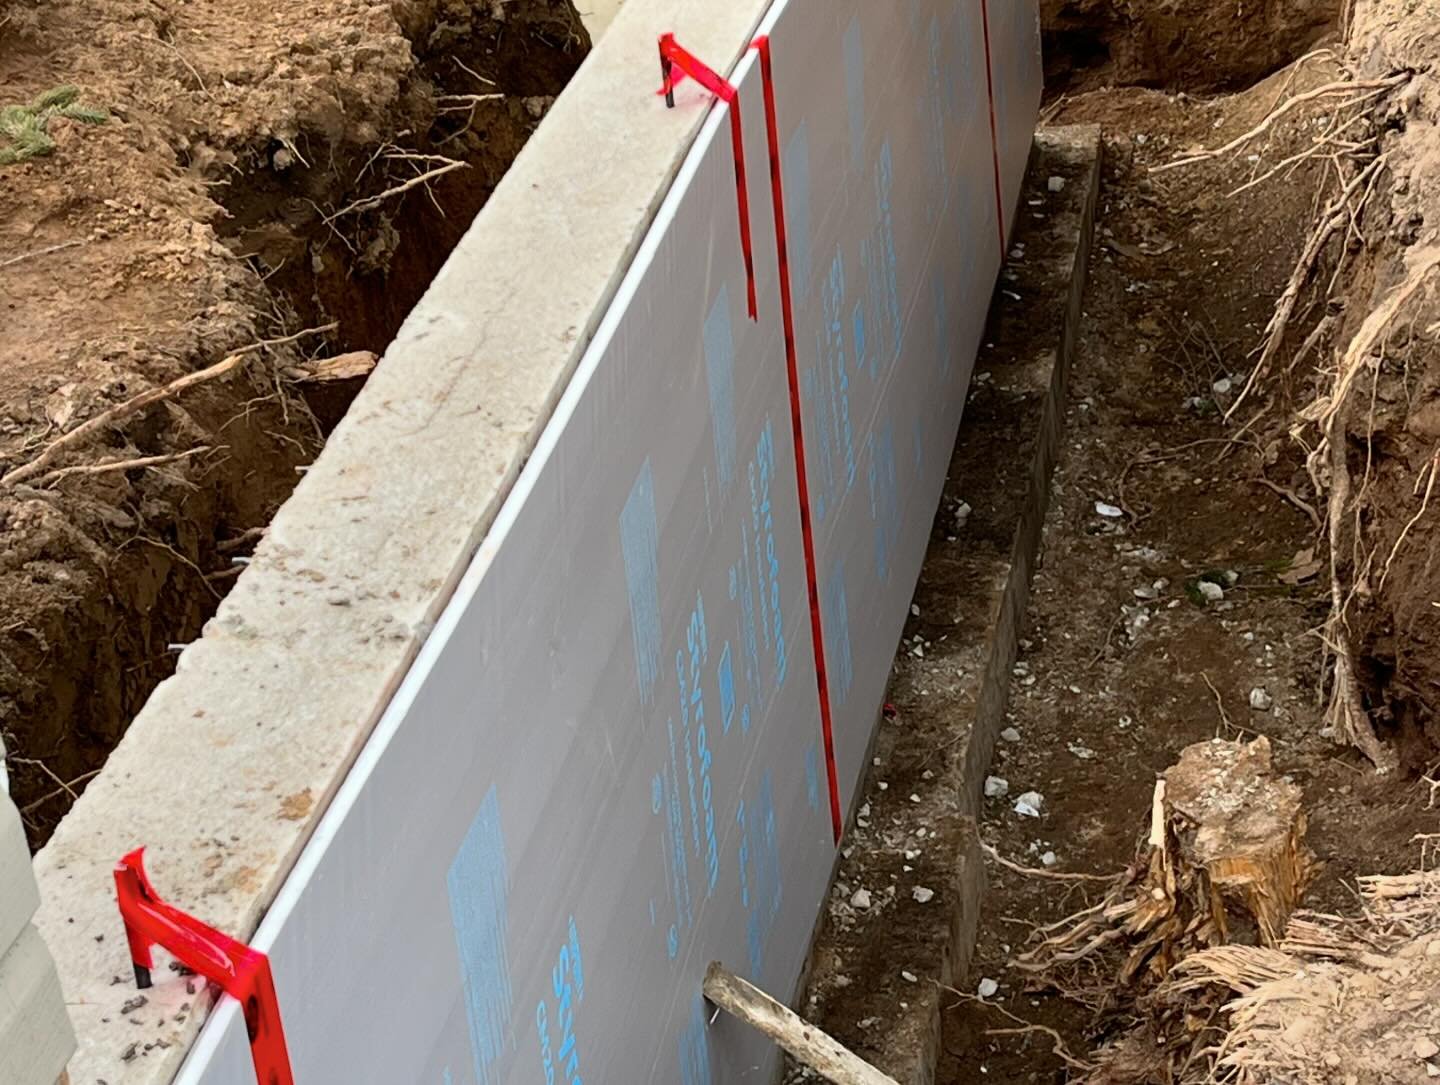 &hellip;. We have been busy , this is from a few weeks back !
Foundation complete and backfilled !
Hashtag

#strategyconst #hamontcontractor #houserenovation #houserenovations #framing  #housereno #restoration
#bathroomrenovation #burlingtoncontracto